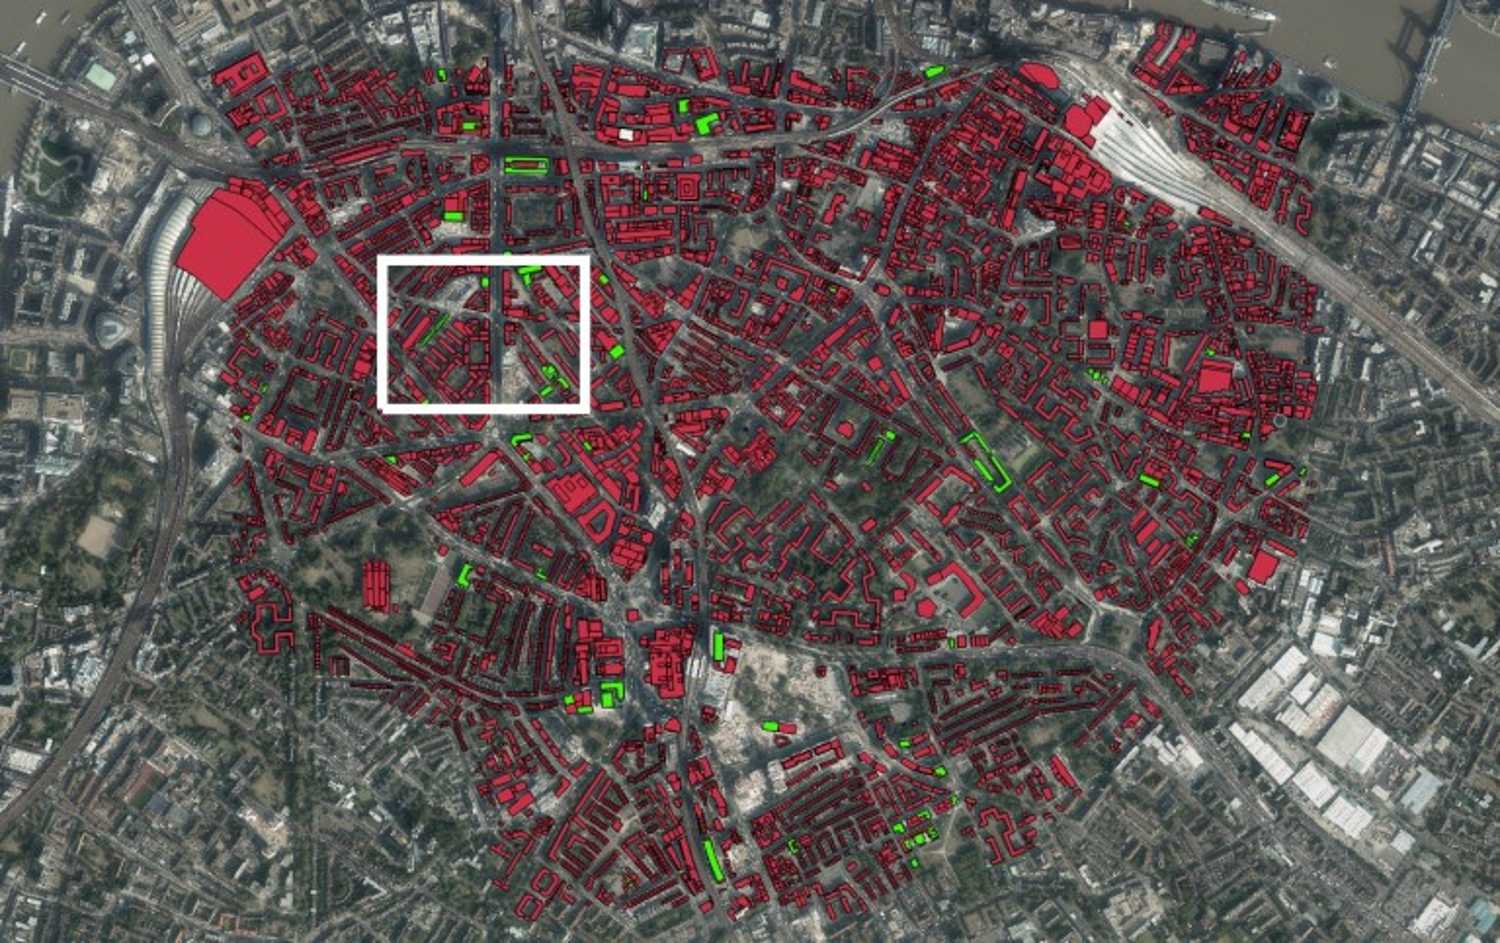 Automated solar potential analysis using AI for effective urban greening insights